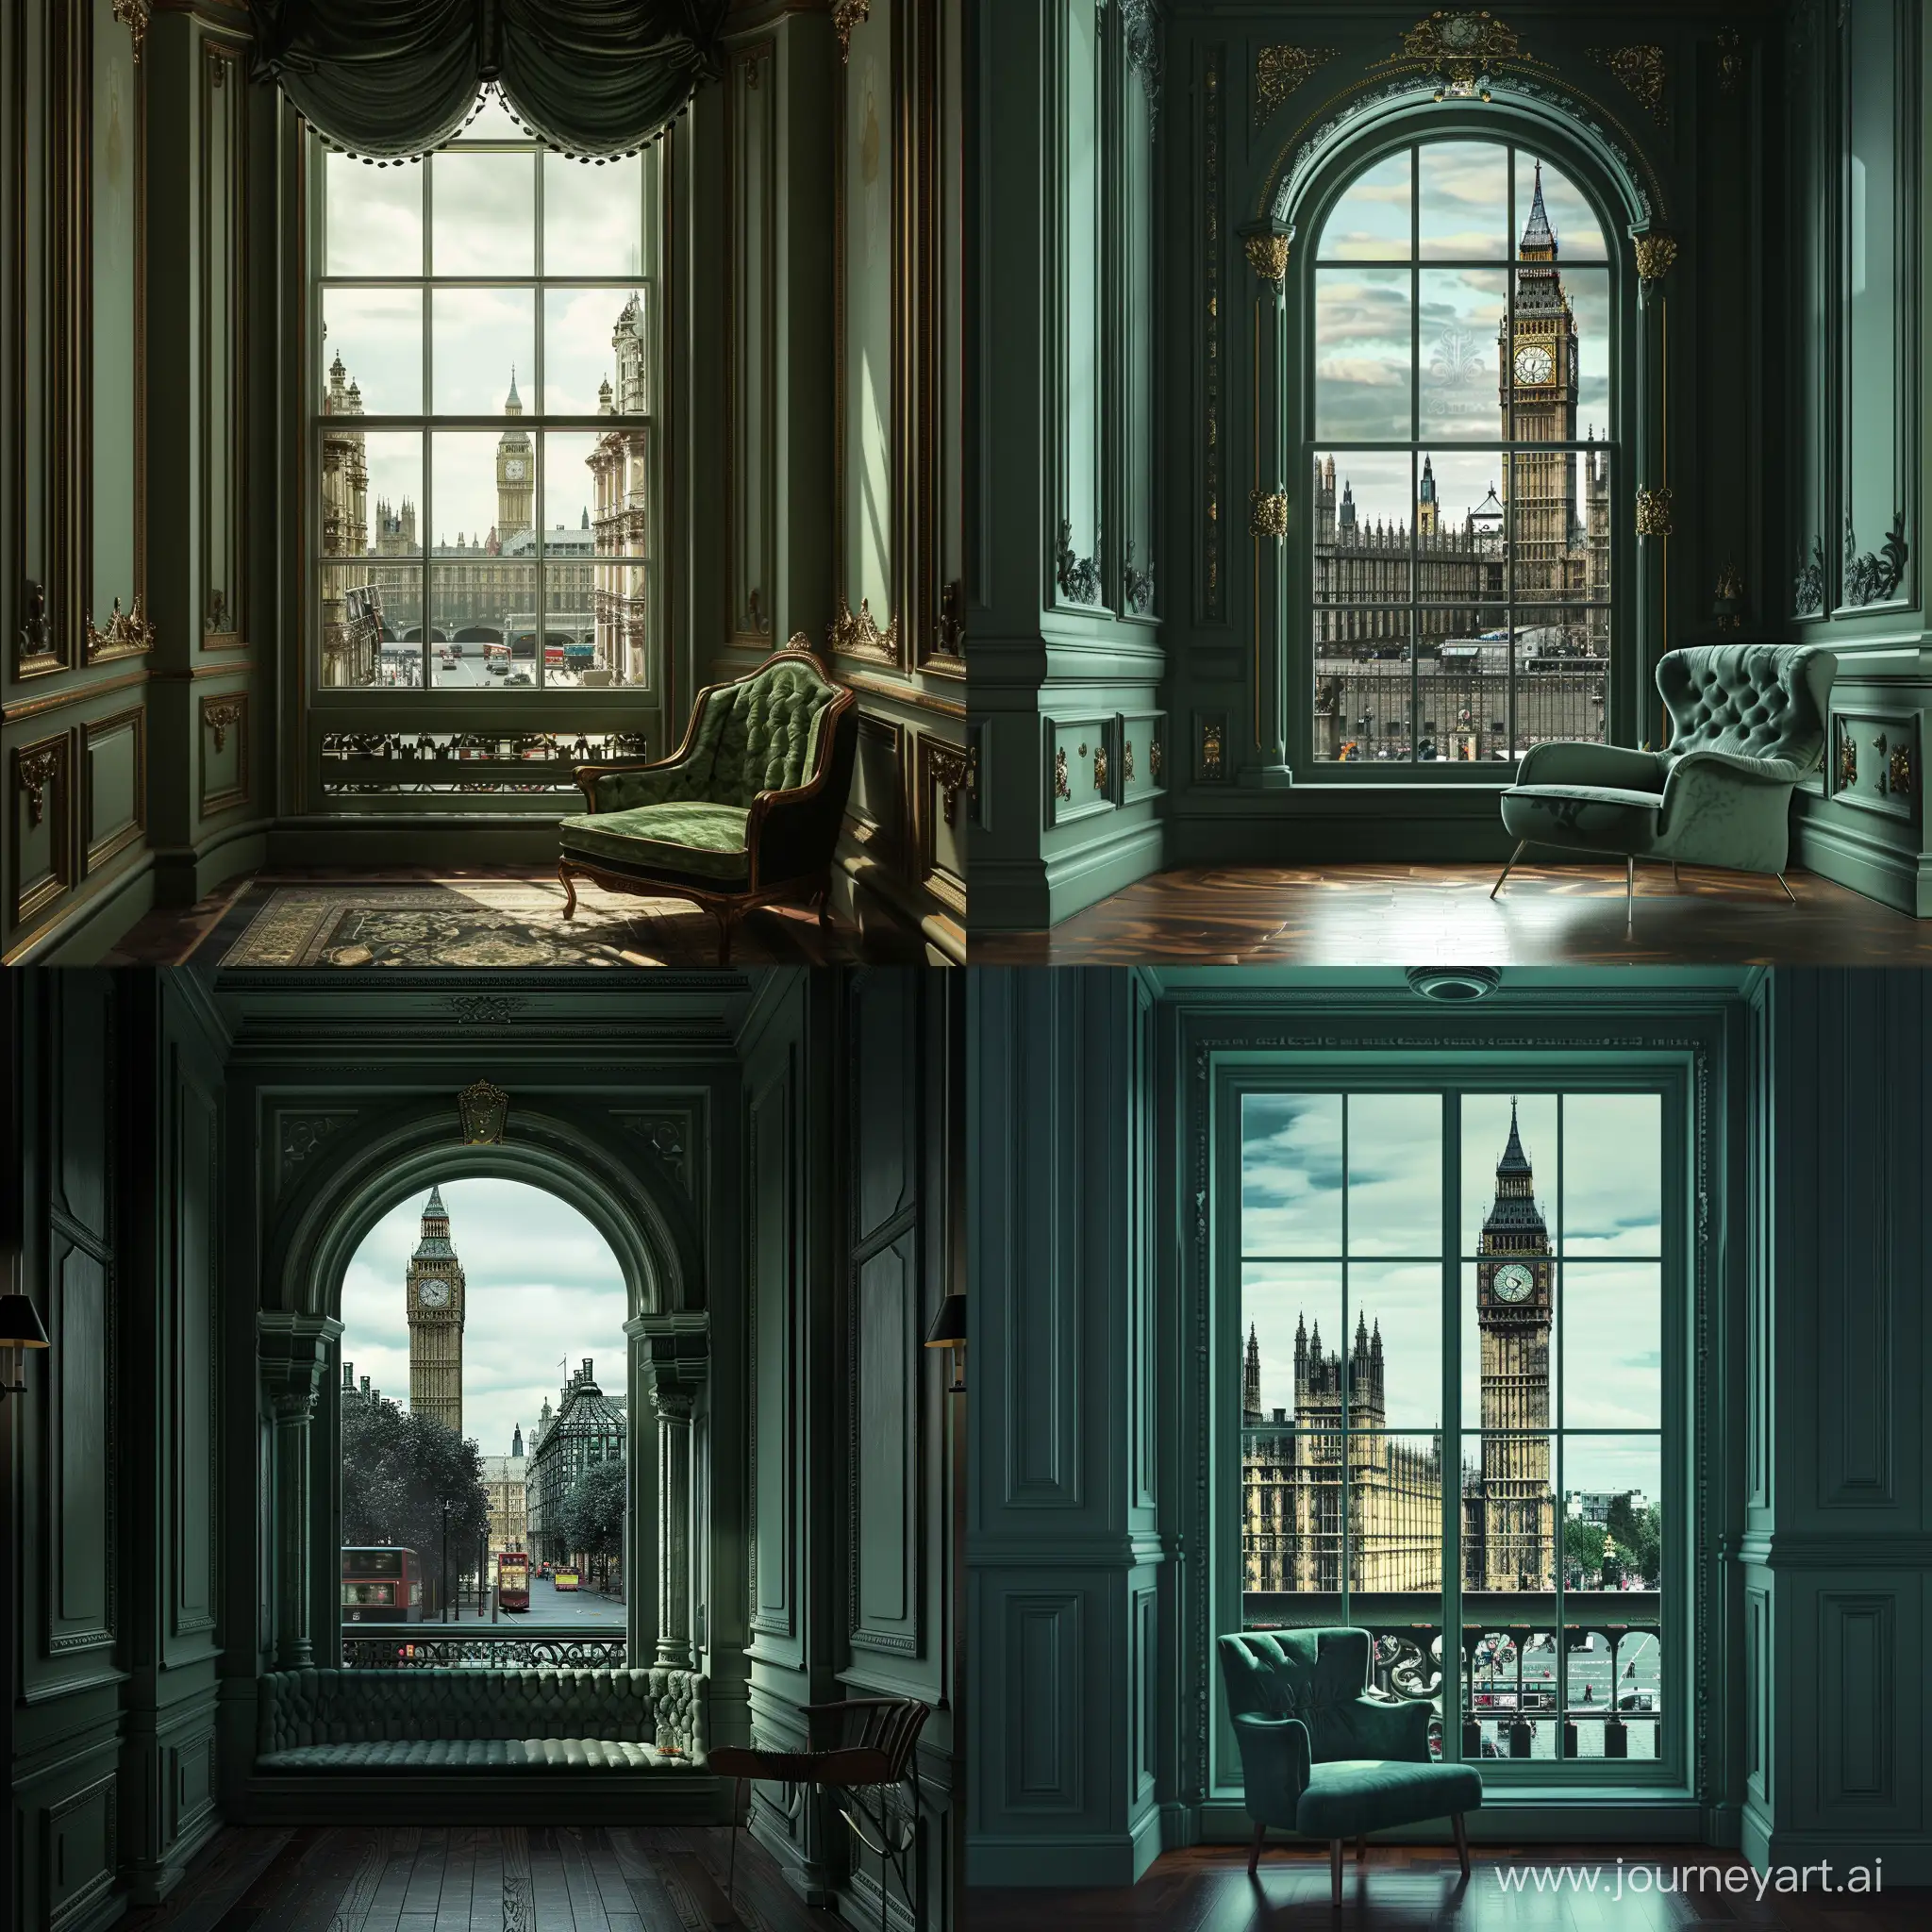 A victorian hotel room. Main color should be dark green. It should be a traditional room that looks like it has been modified to be modern, but retains its traditional victorian decoration. Make it so that it can be used in an architectural portfolio. The window, which has no balcony, should show a streetscape with the big ben.